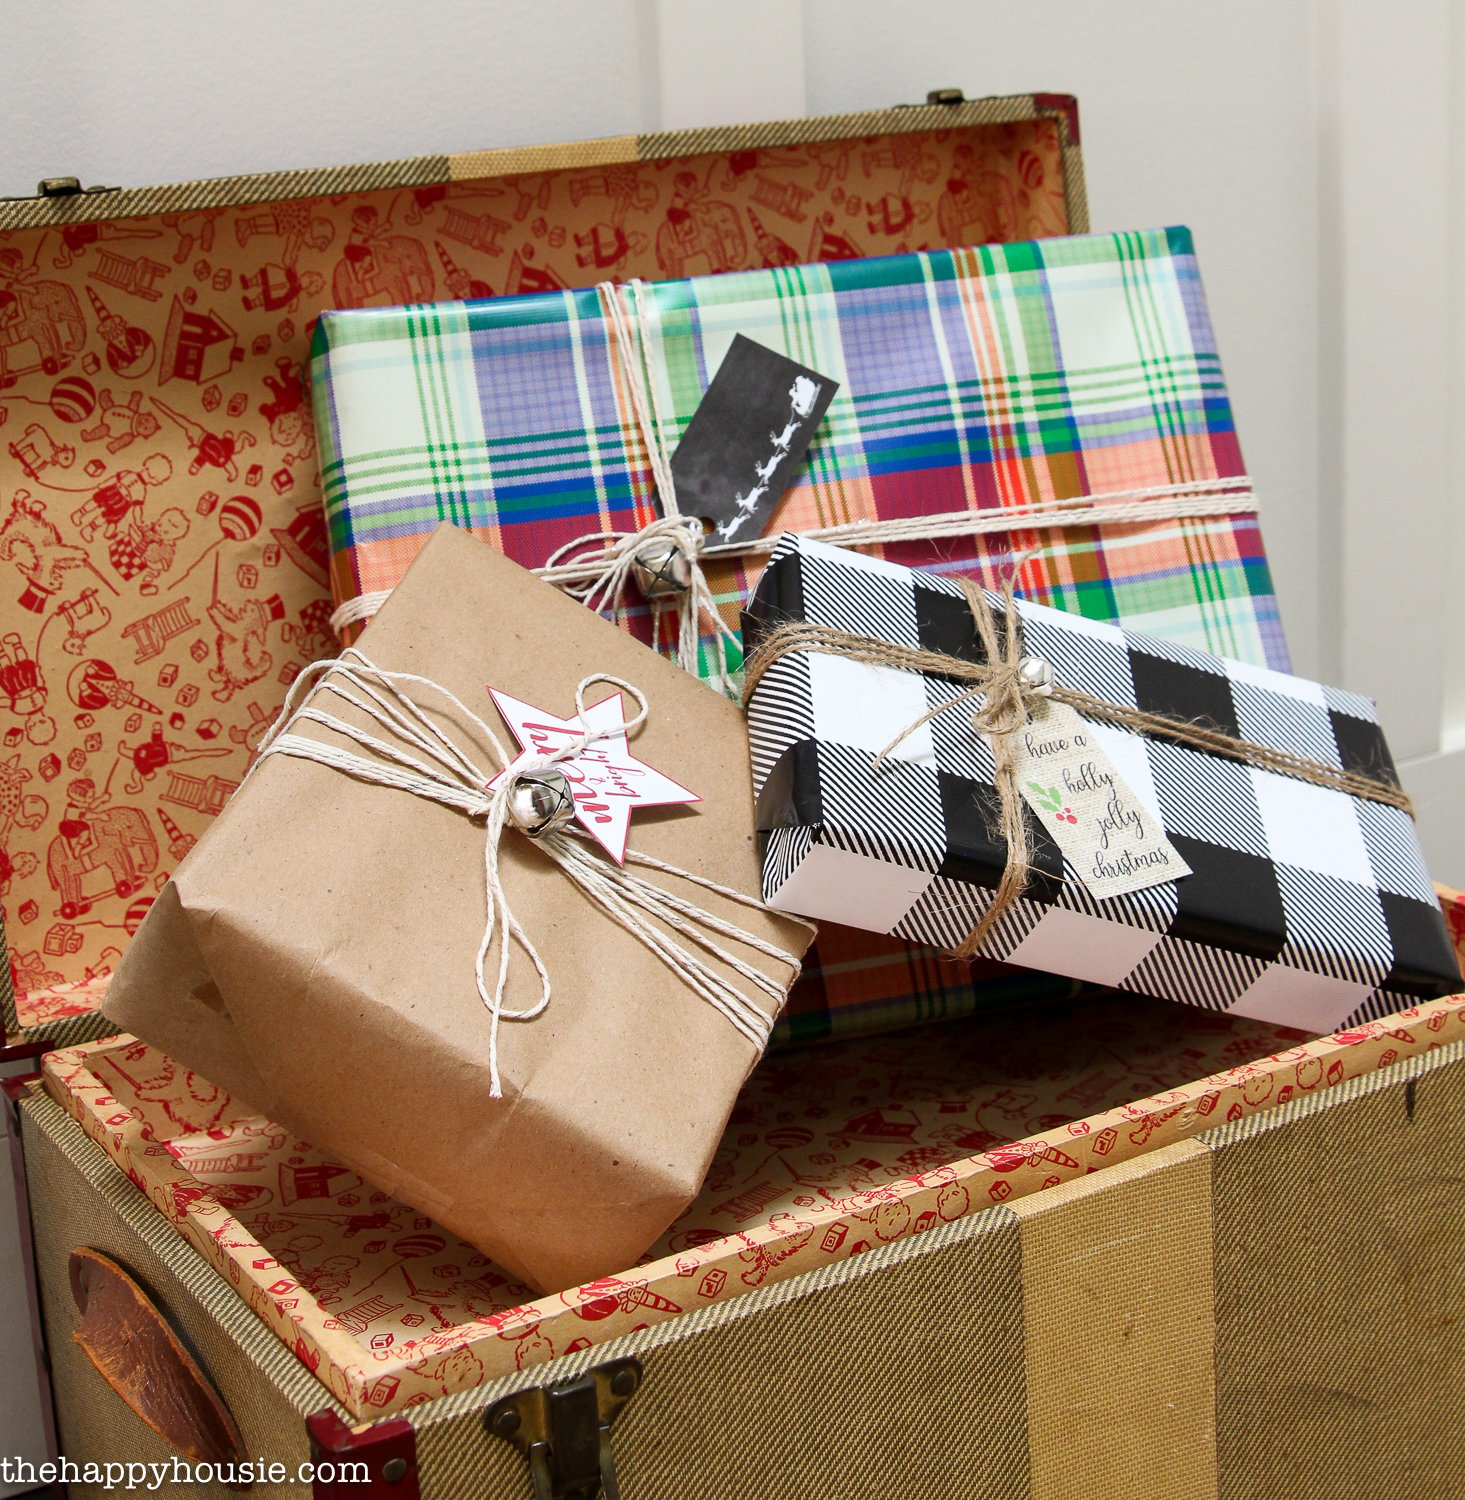 A vintage trunk is filled with wrapped presents.